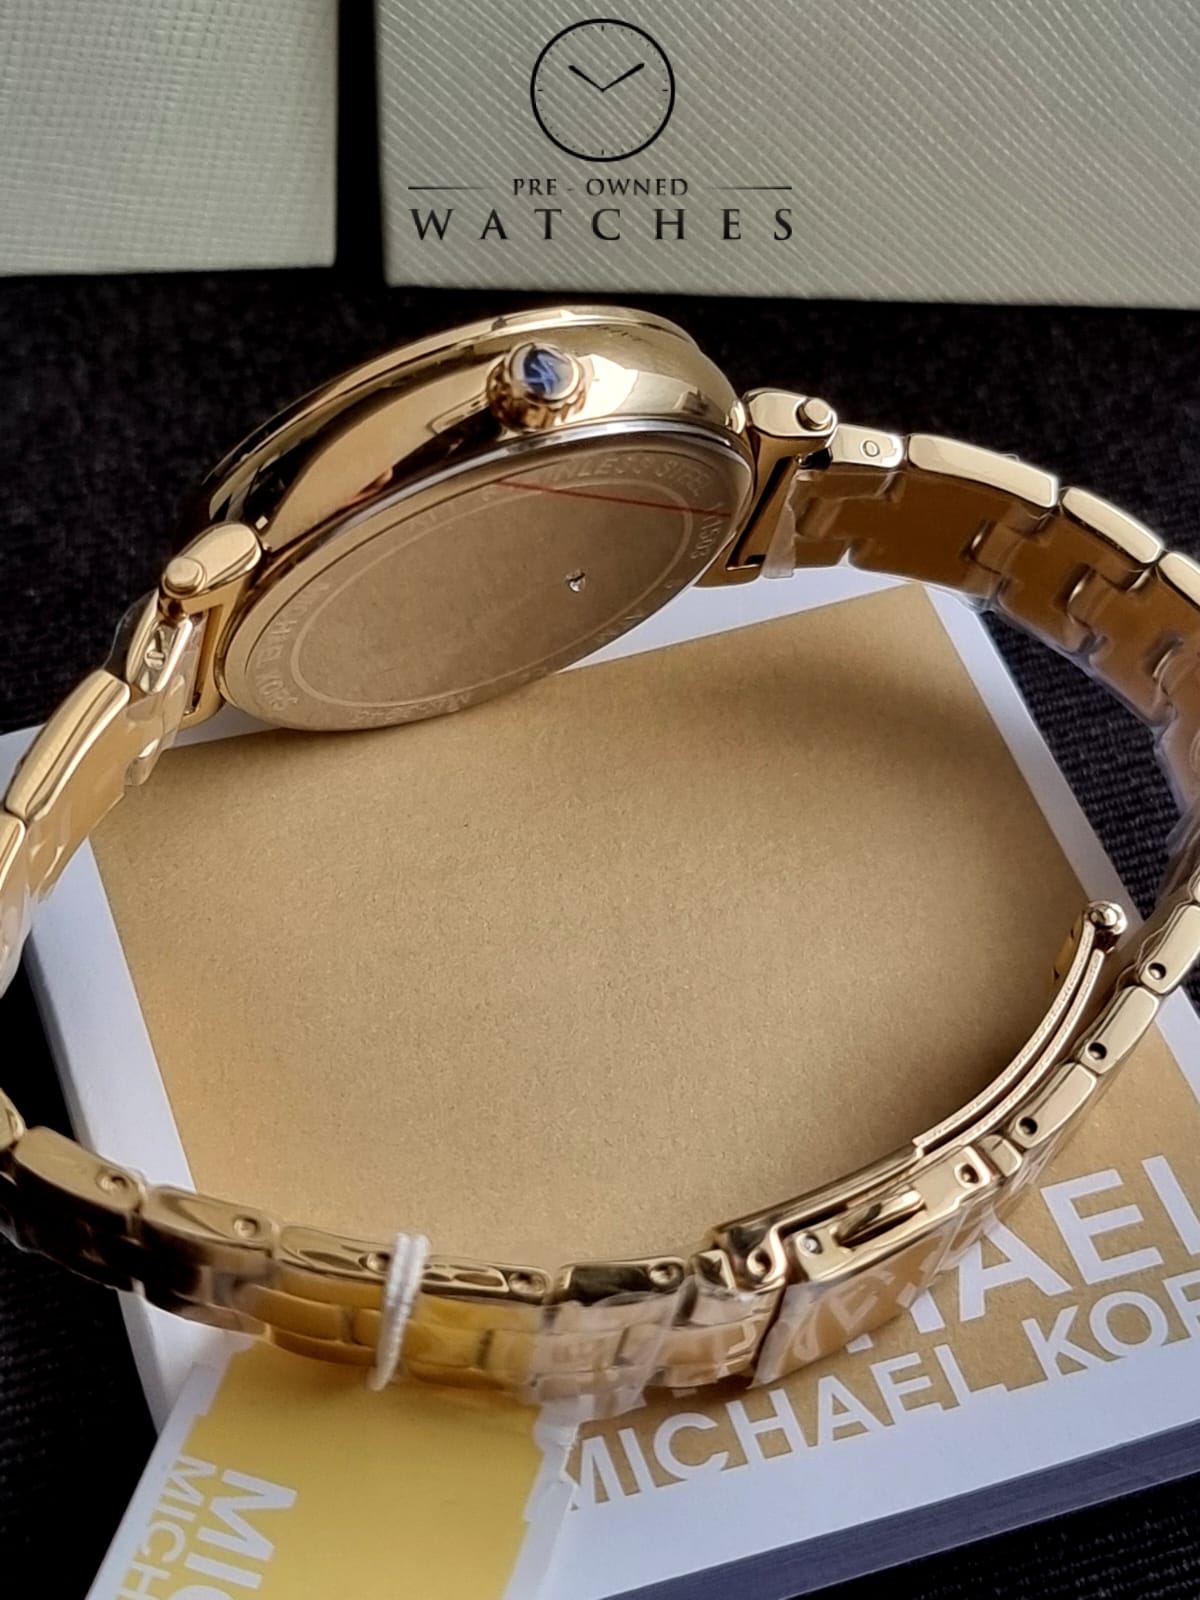 Michael Kors Gold Dial Metal Band Watch - MK3945 – Pre-OwnedWatches